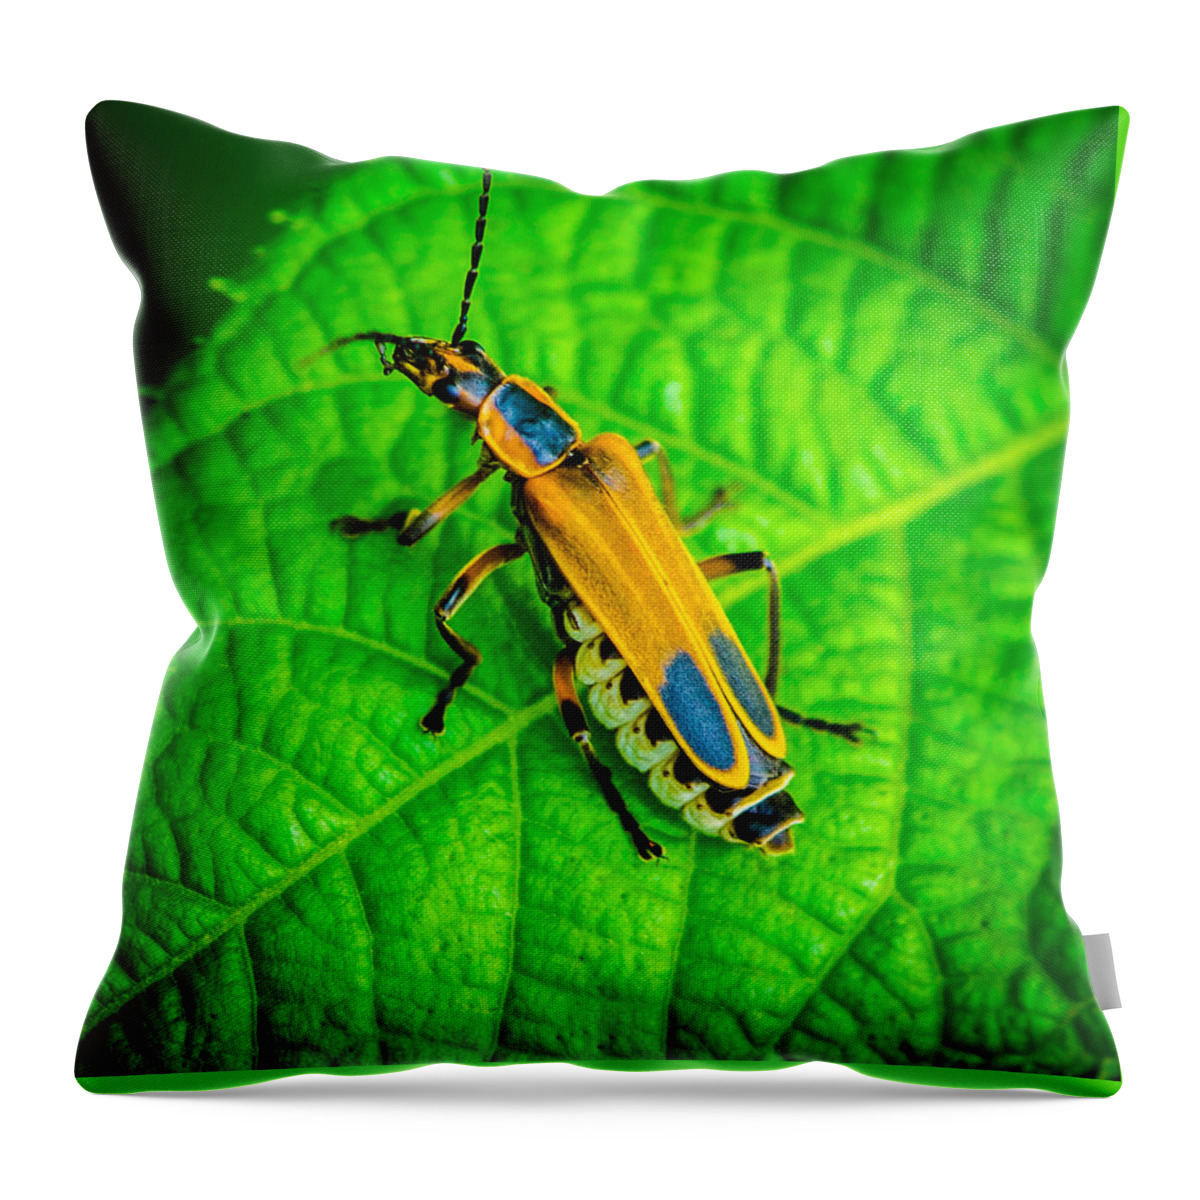 Soldierbeatle Throw Pillow featuring the photograph Soldier Beatle Macro by Bruce Pritchett